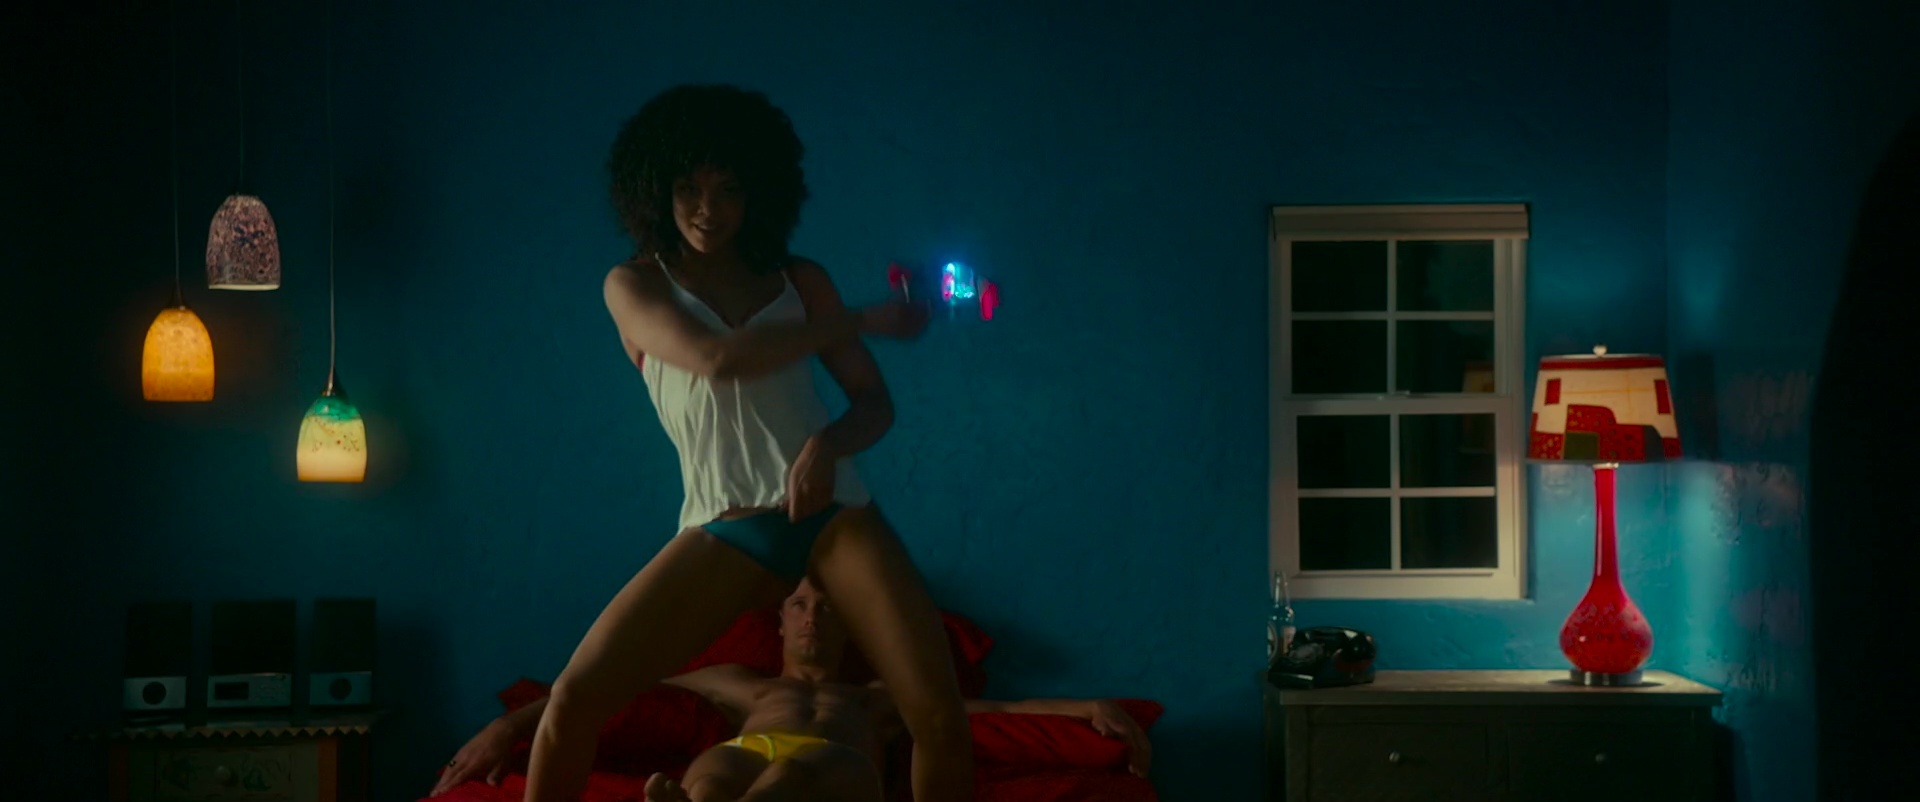 Naked Tessa Thompson In War On Everyone